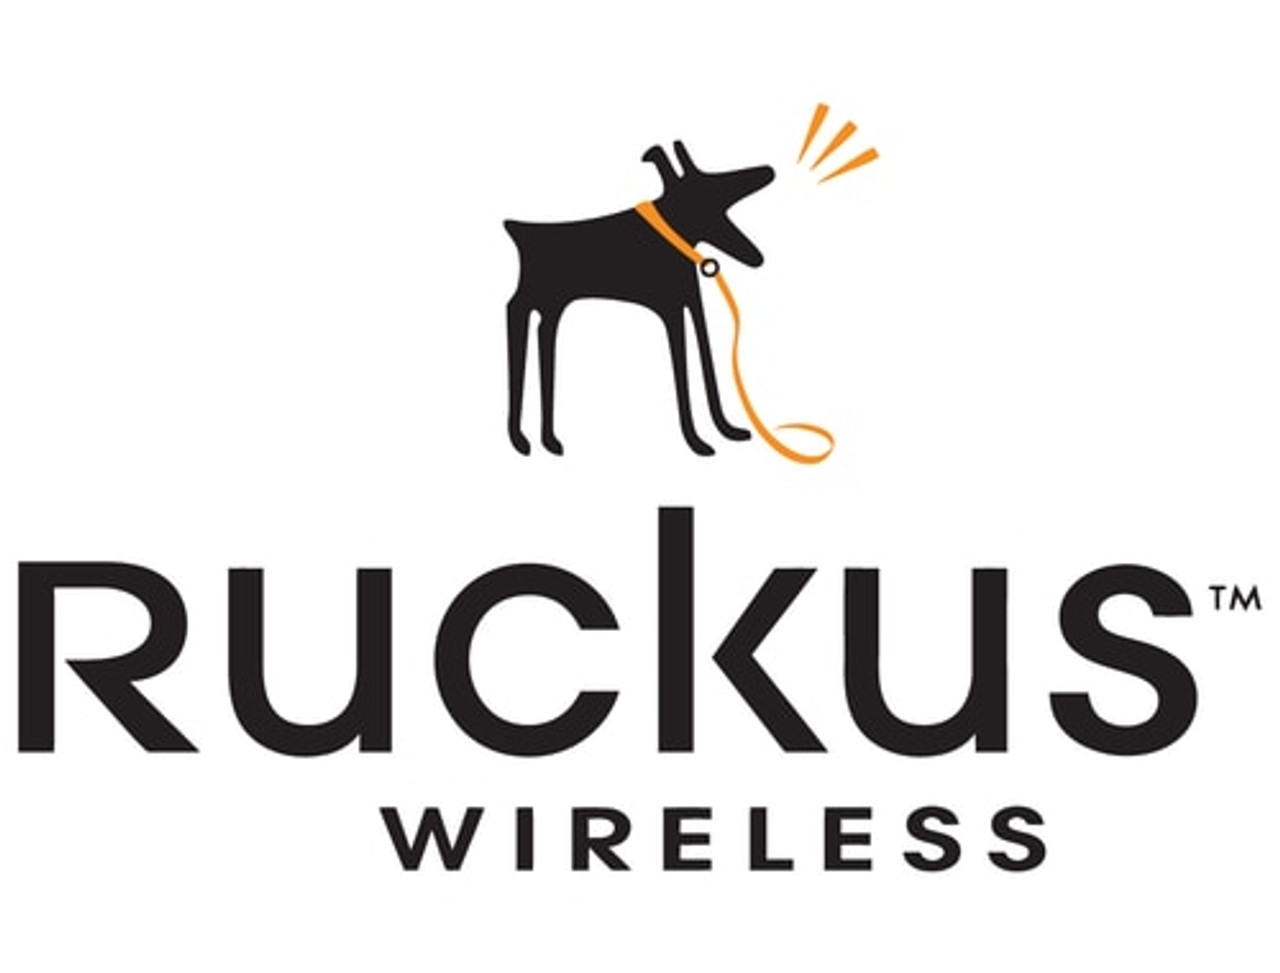 Ruckus Fiber Backpack (P01-0500-0000) Accessory - Bulk pack x25 units per box - Plastic Cover extension to match the IOT cover on H510. This accessory is to be used only when Fiber Backpack is co-installed with a H510